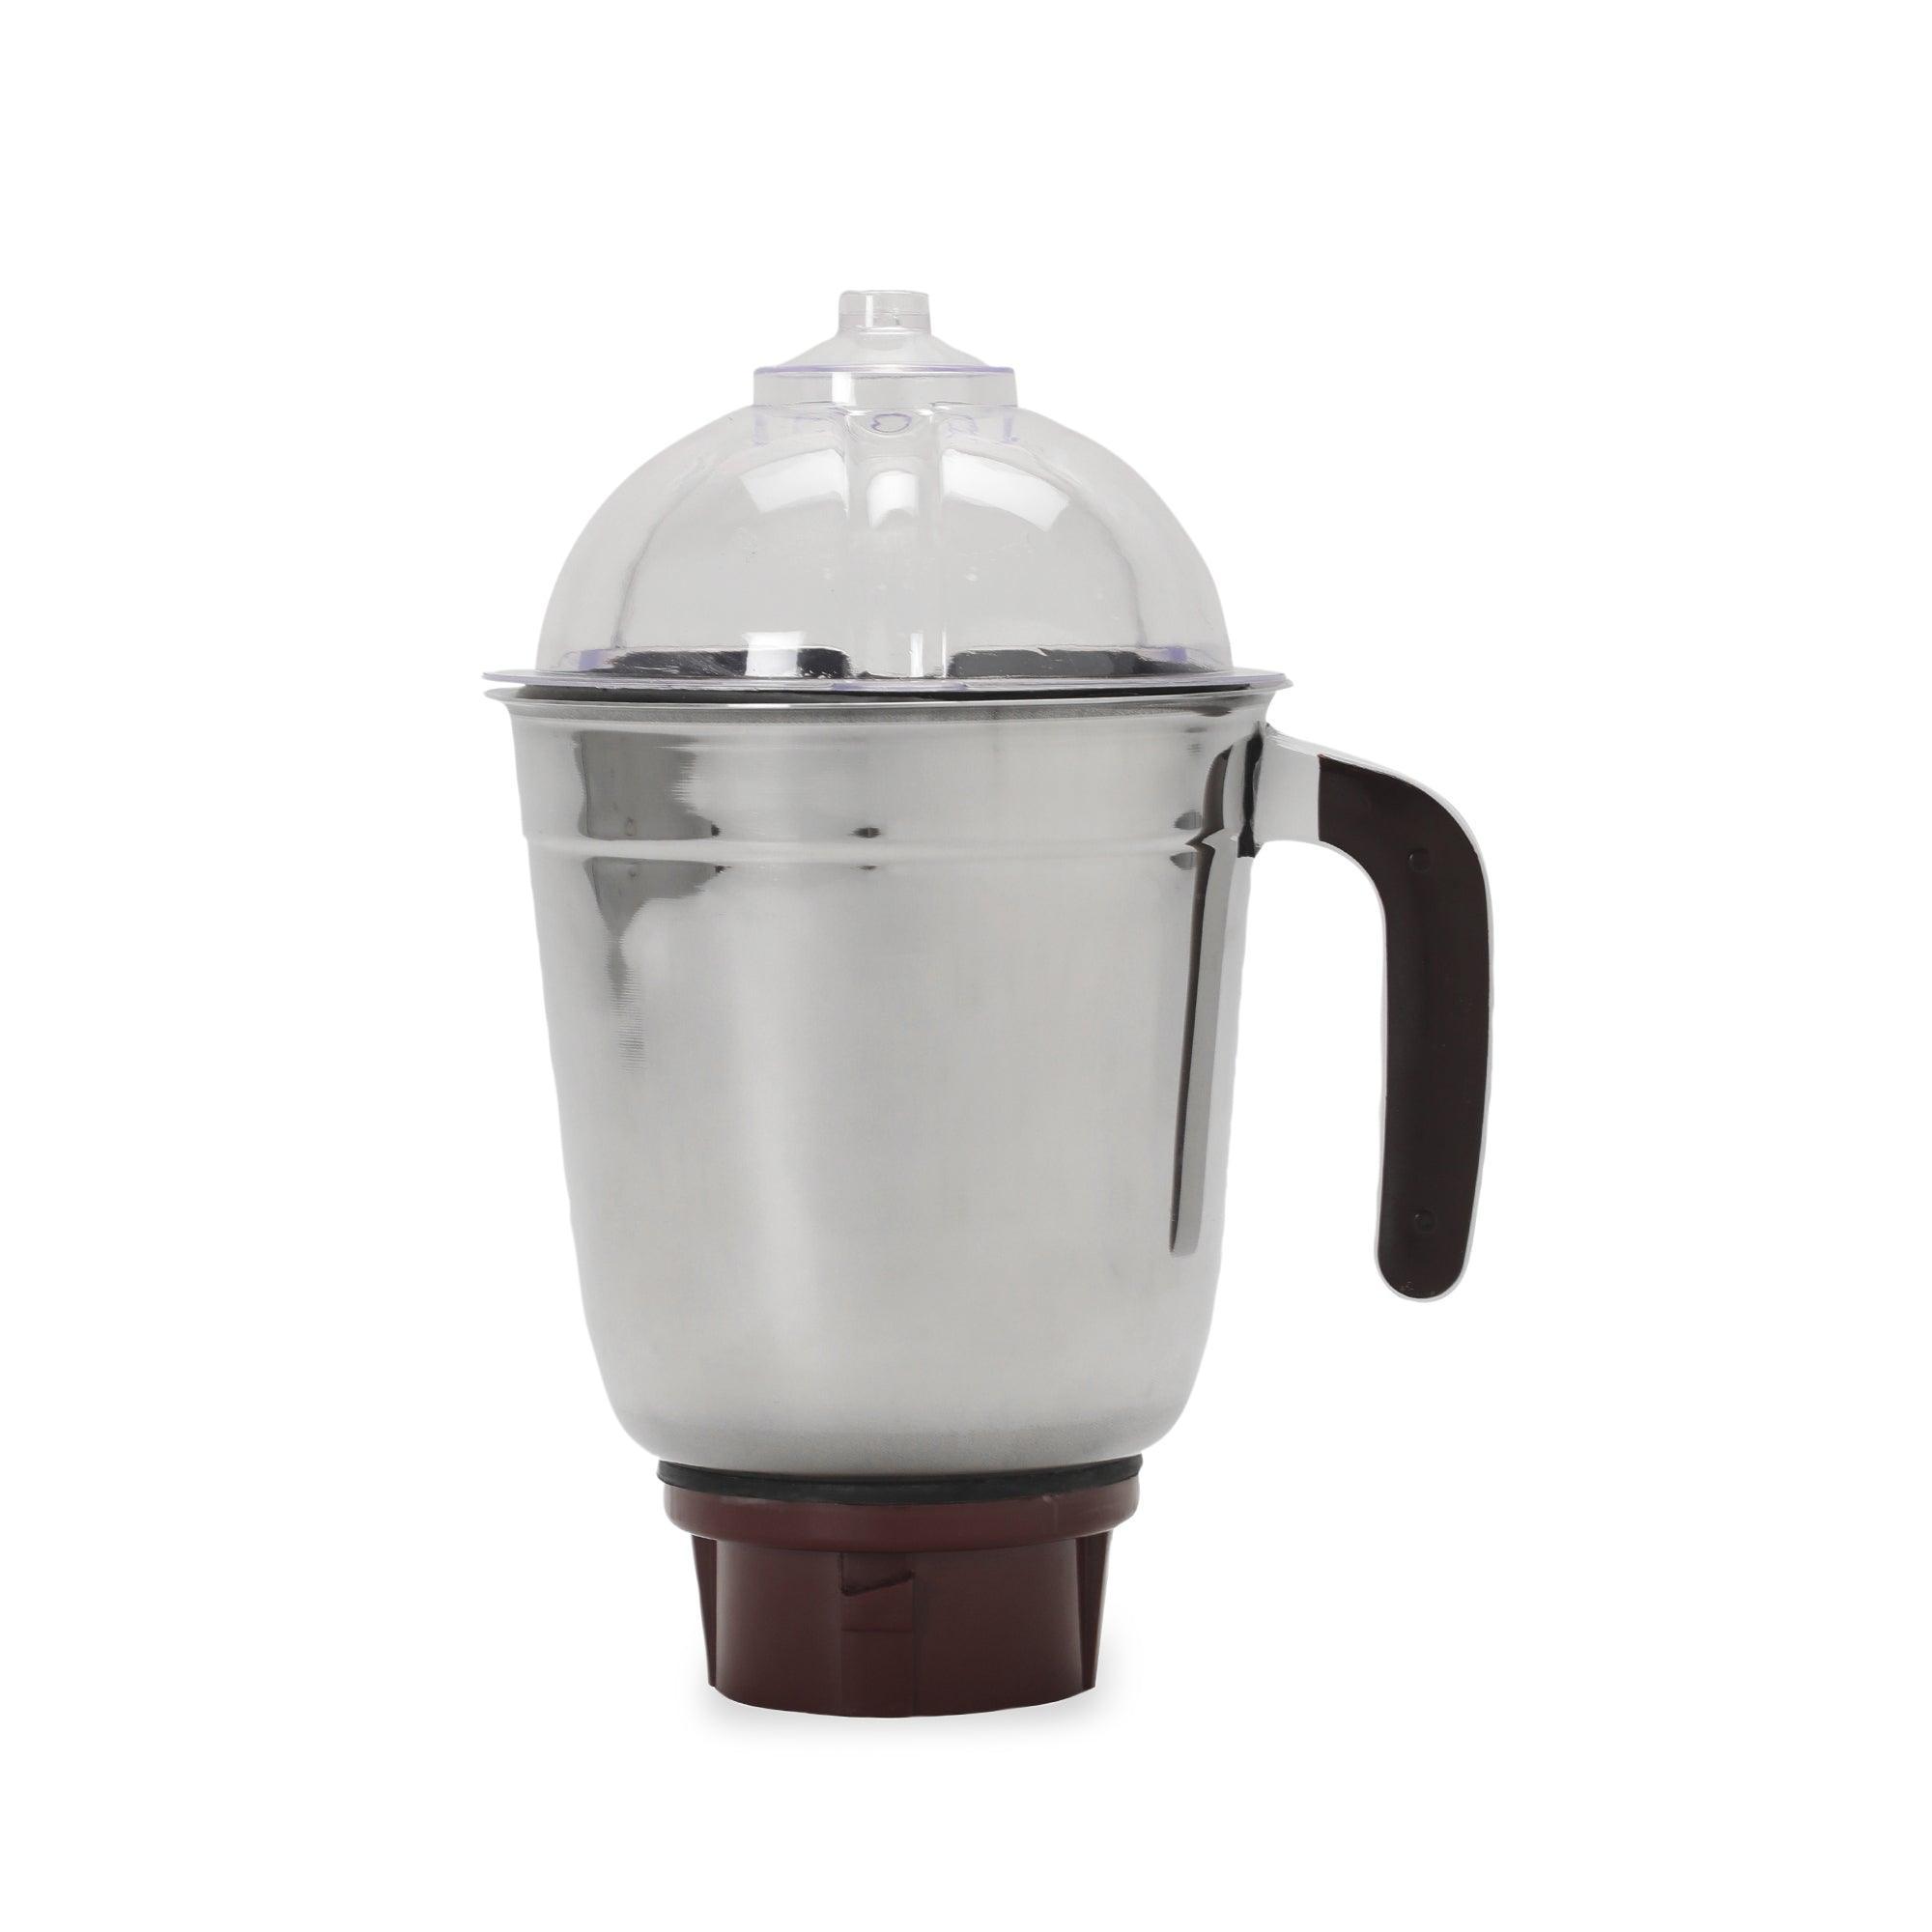 STYLUS - 550 Watts Mixer Grinder - 110V Motor(USA AND CANADA) - SOWBAGHYA